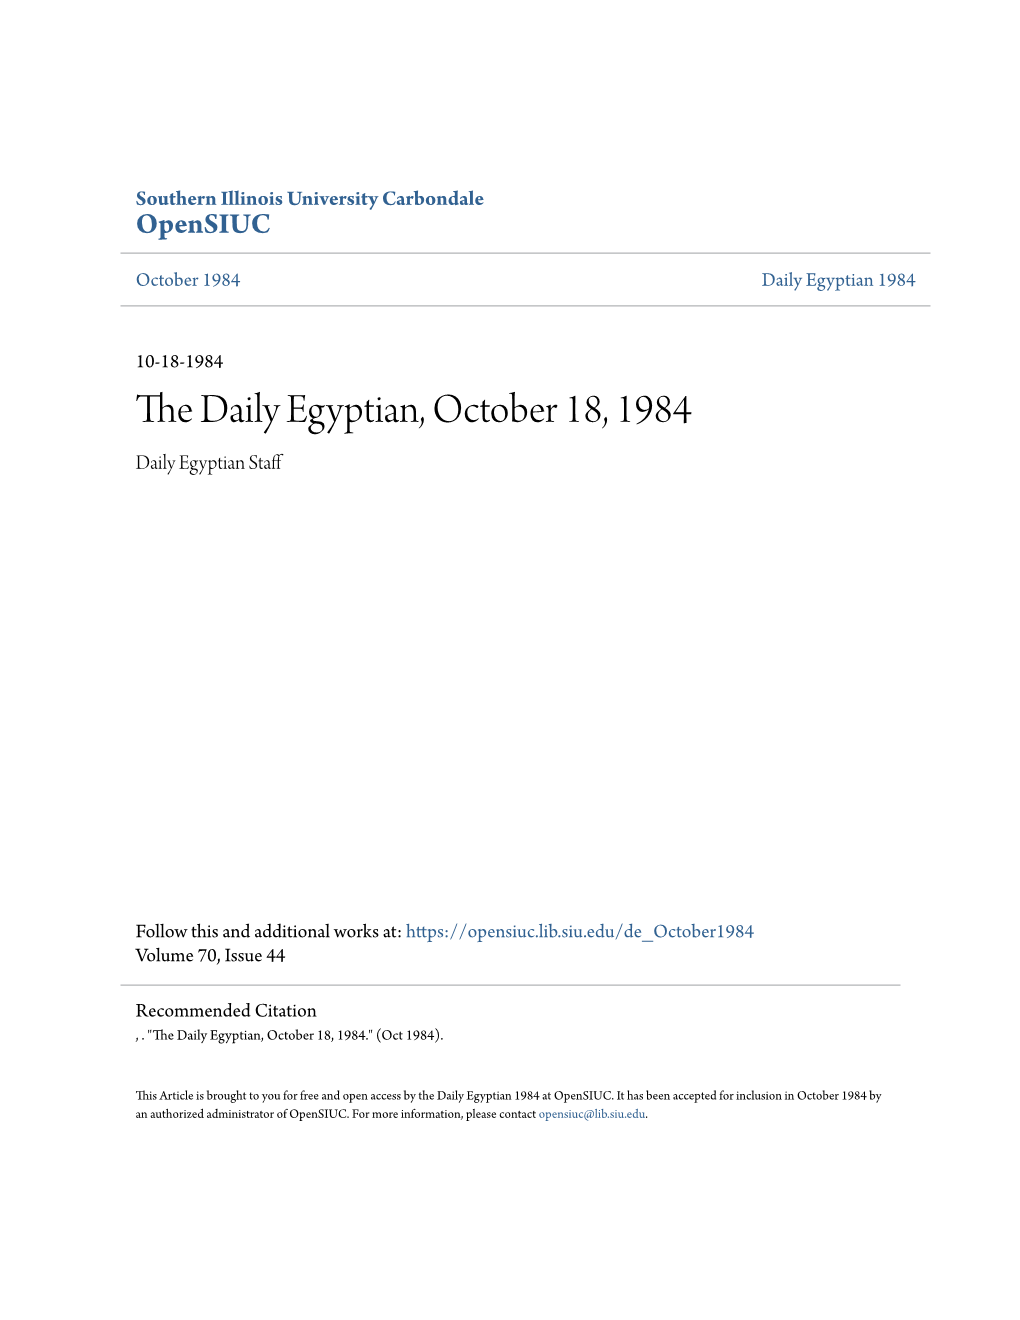 The Daily Egyptian, October 18, 1984